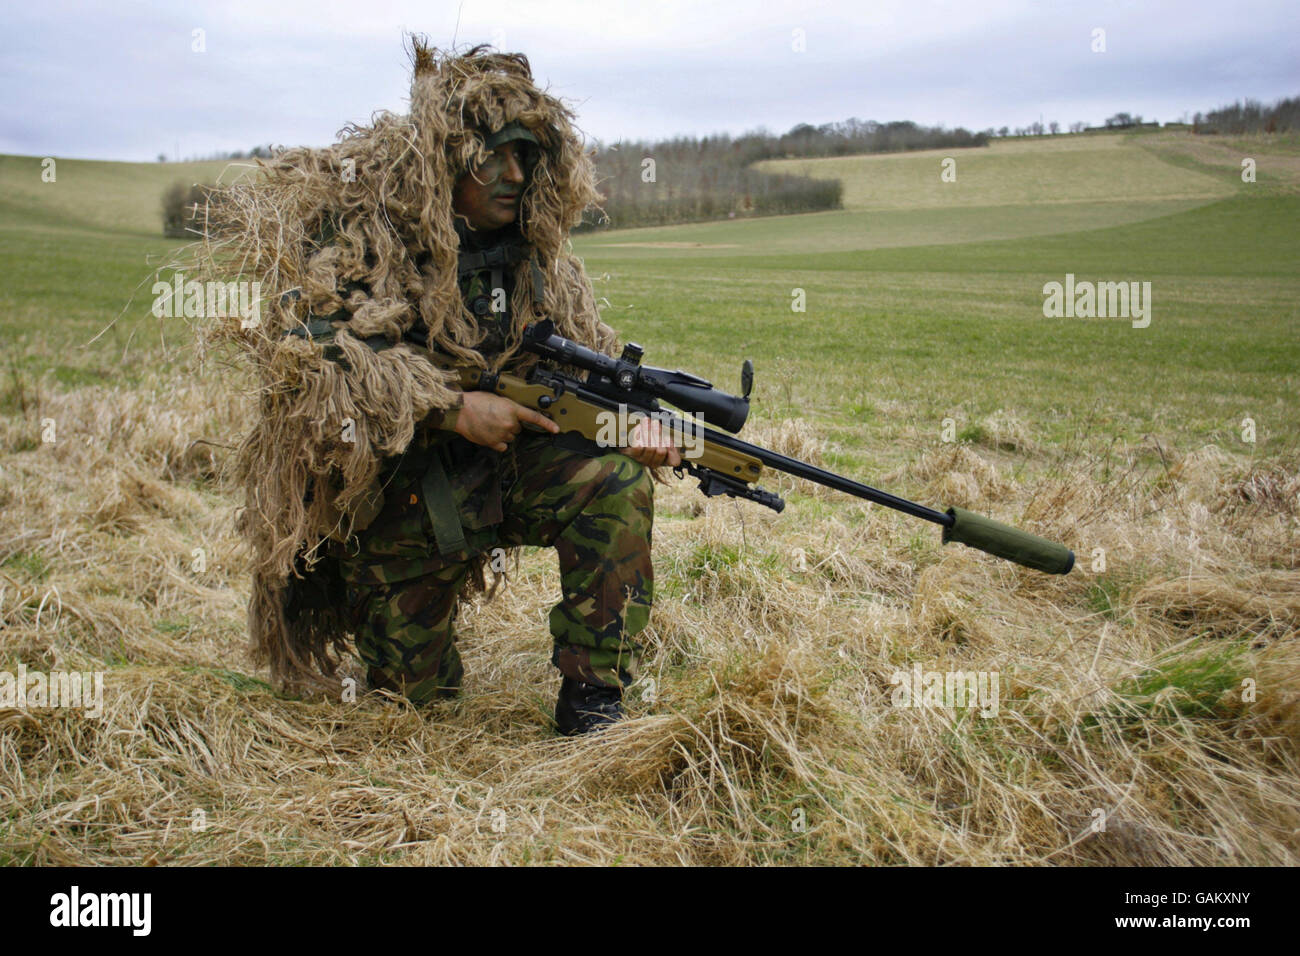 New sniper rifle unveiled Stock Photo